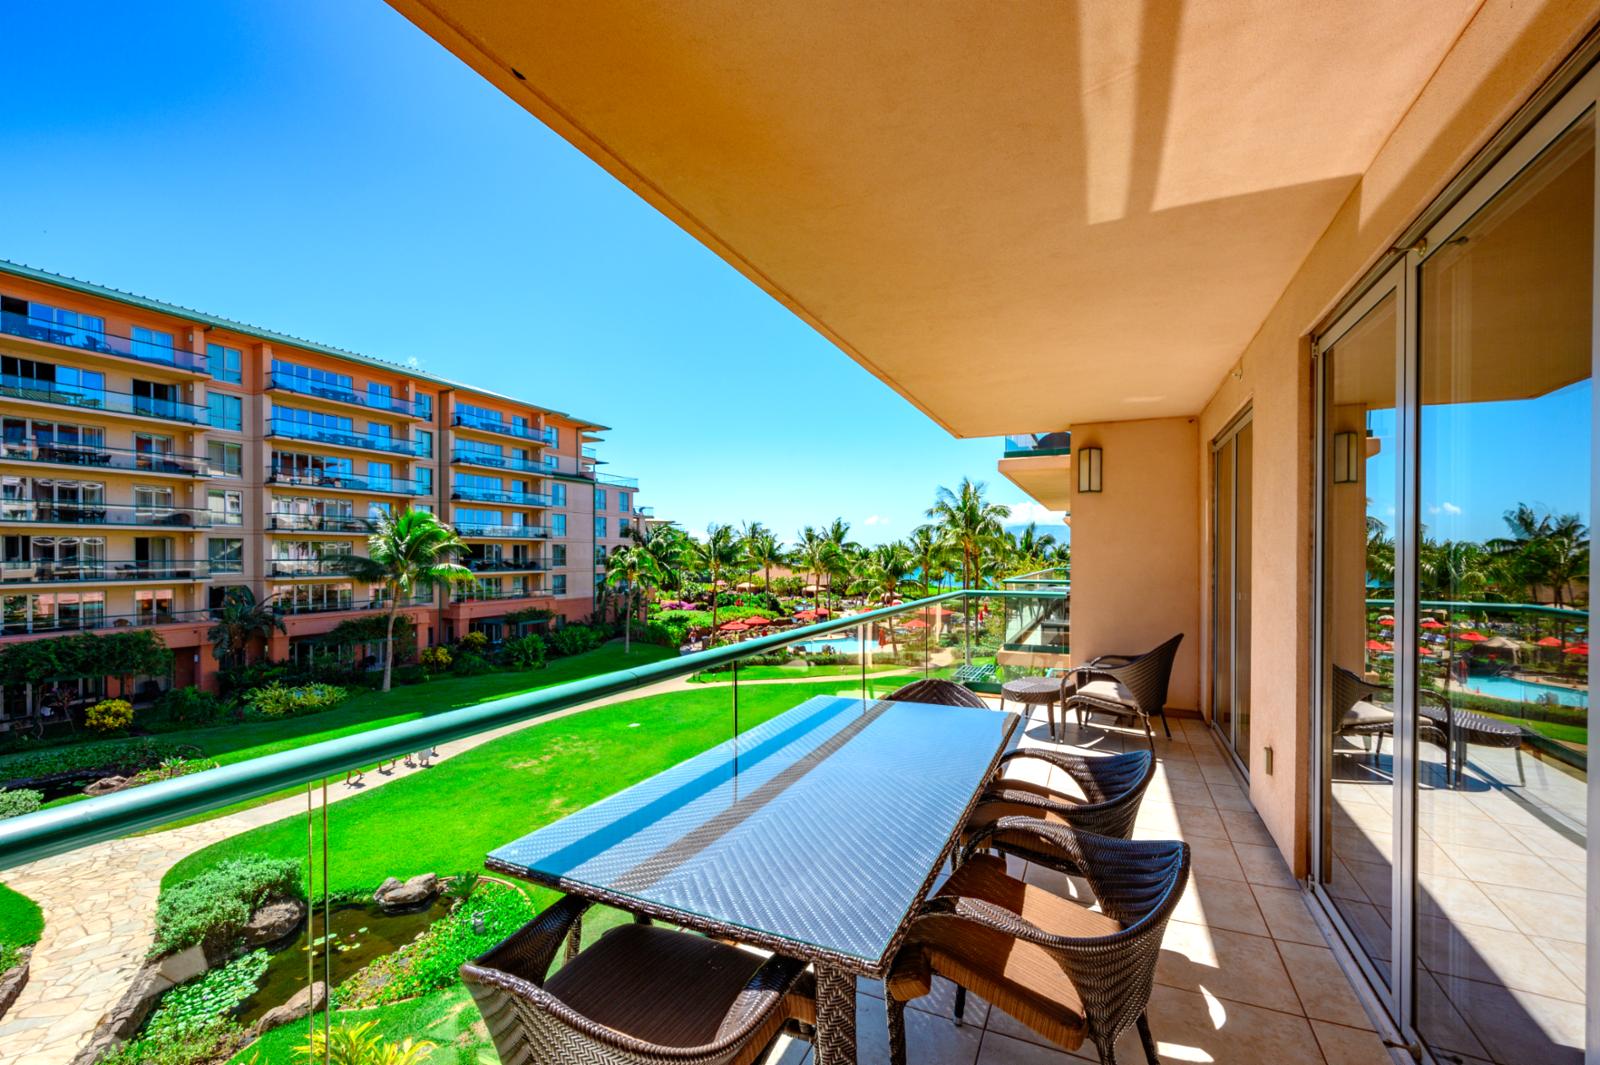 Lanai with Pool View and table for dining